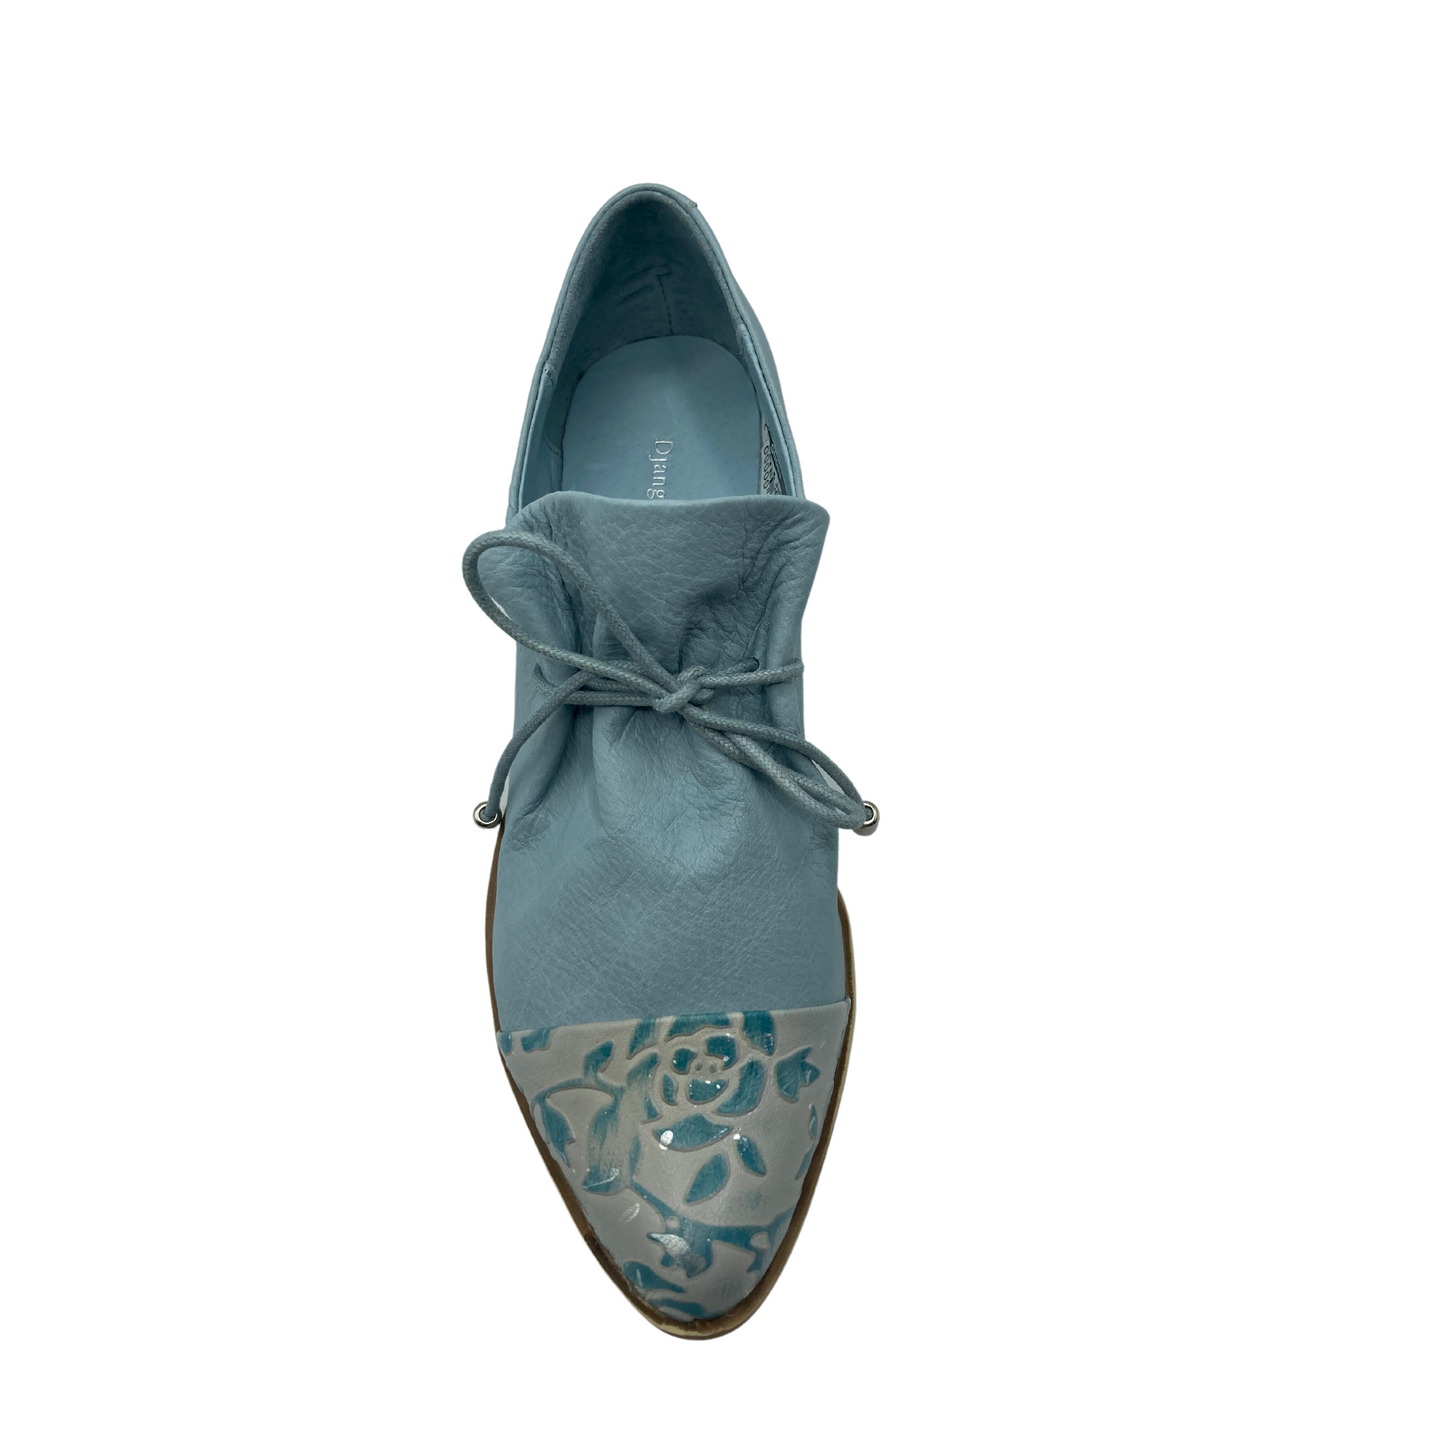 Cute little loafer in denim blue with a toe cap in an embossed floral blue/silver leather.  Shoe is all one piece with the tongue attached and ruched by the laces